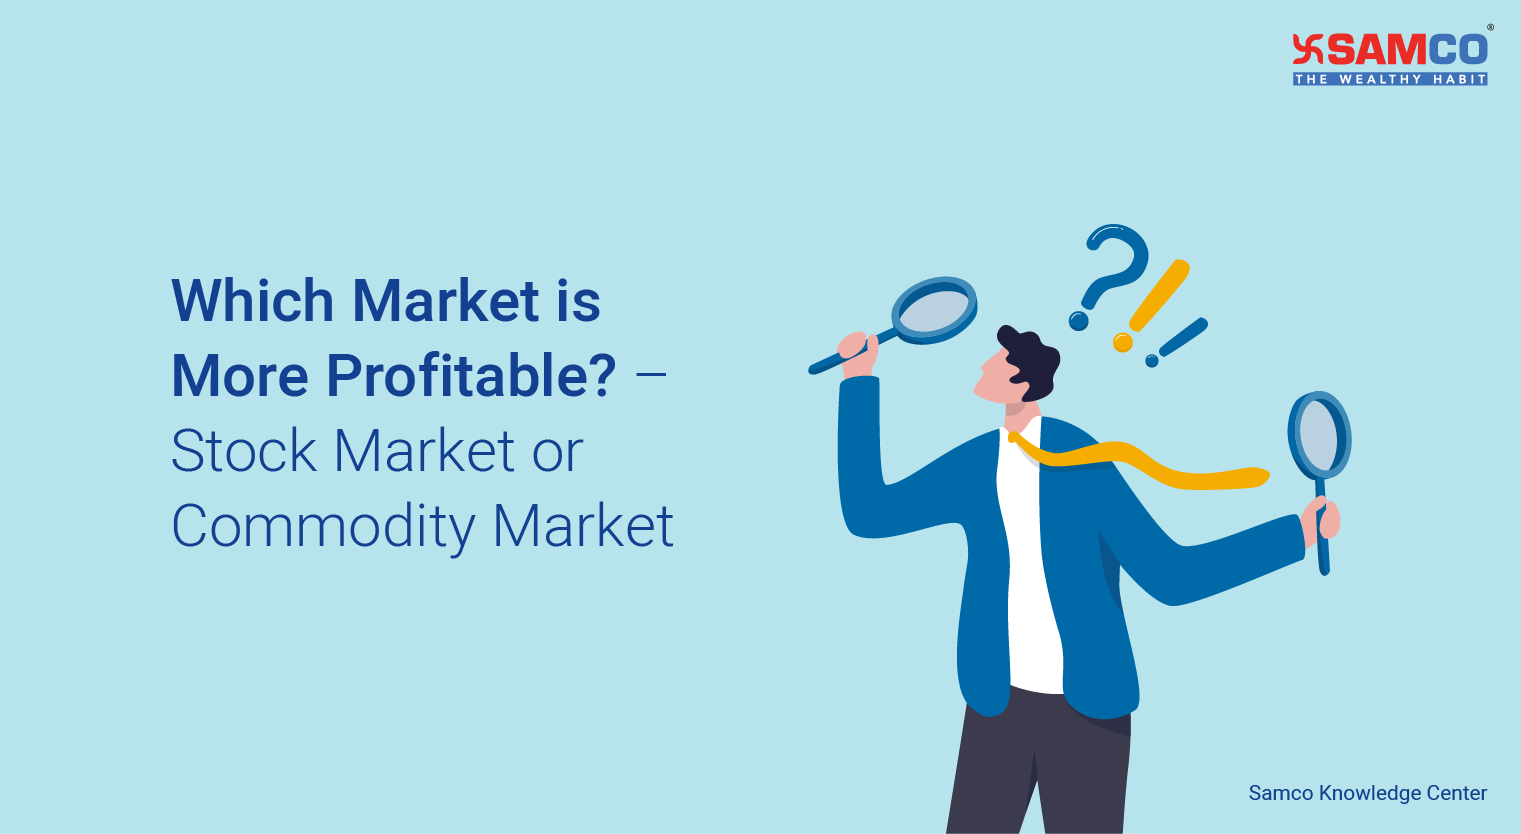 Which Market in More Profitable. Stock Market or Commodity Market